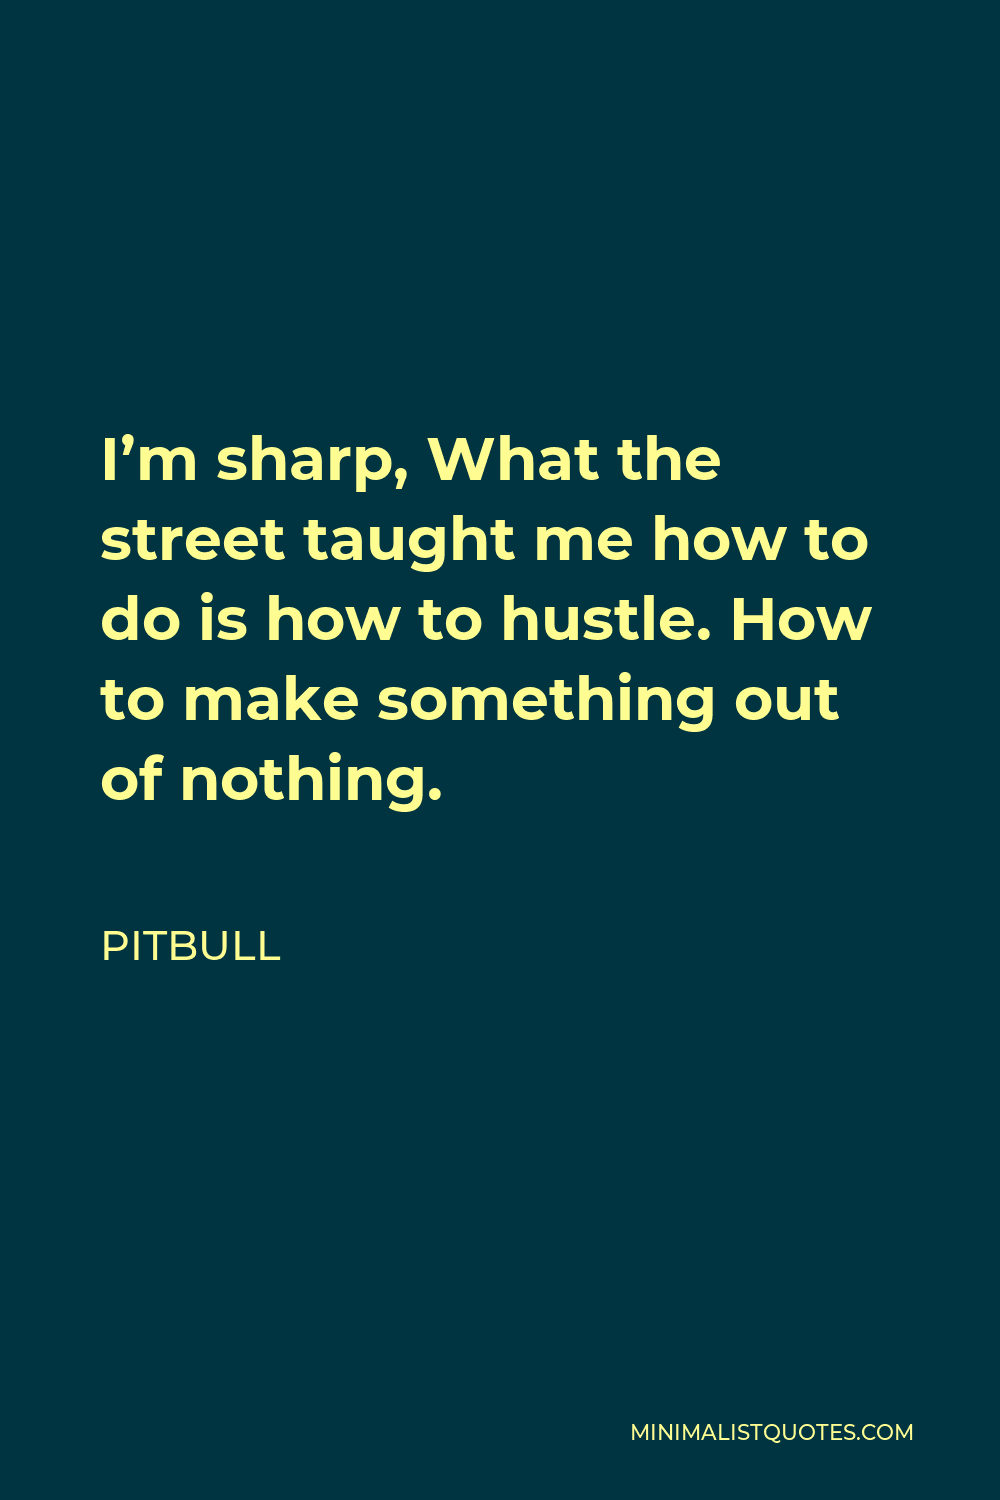 Pitbull Quote - I’m sharp, What the street taught me how to do is how to hustle. How to make something out of nothing.